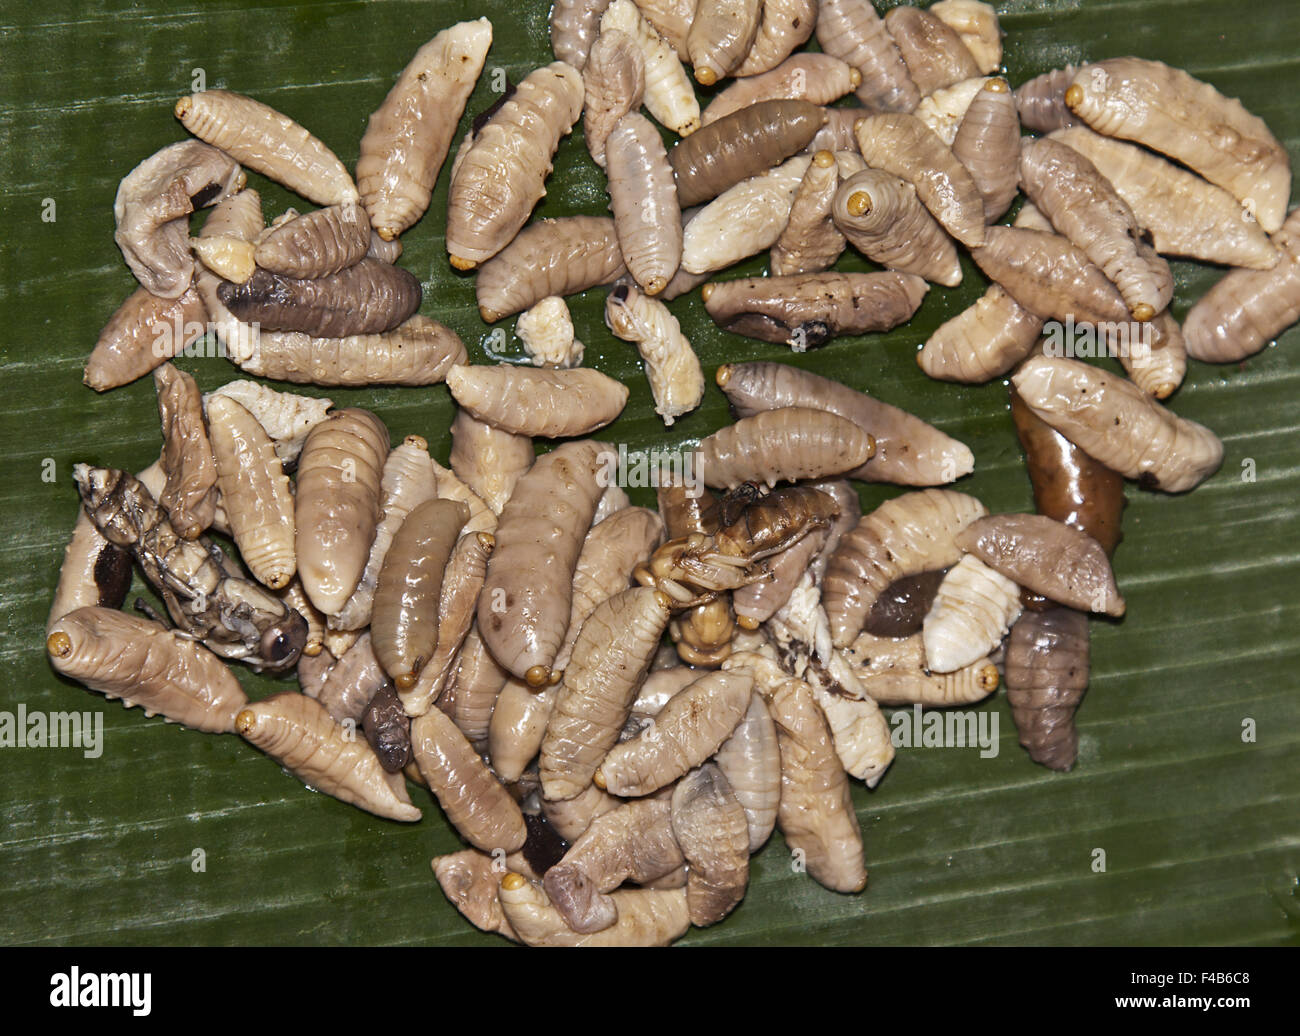 Larvae of queen bees Stock Photo